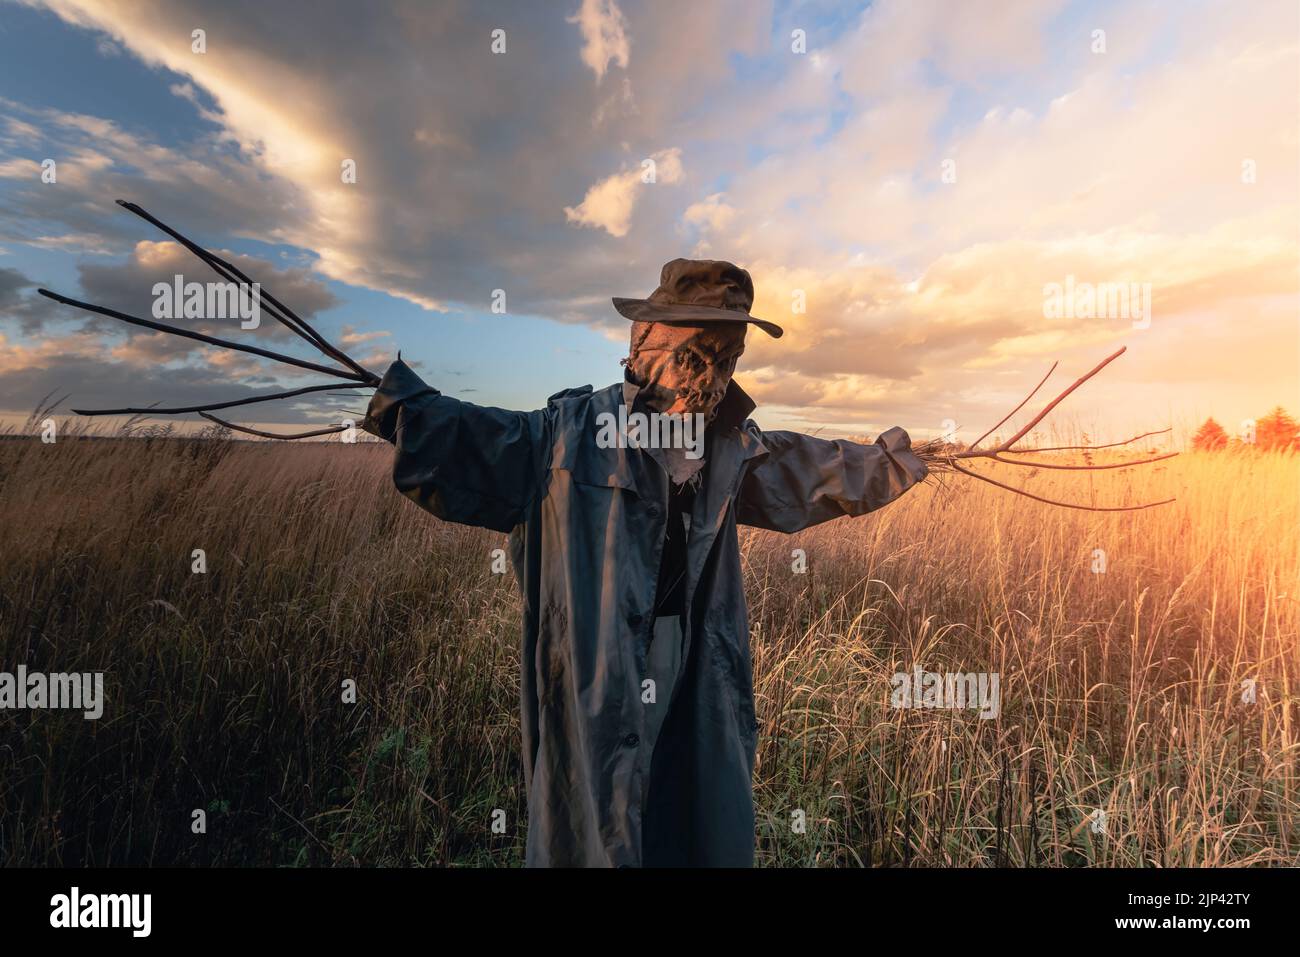 Scary scarecrow in a hat and coat on a evening autumn field during sunset. Spooky Halloween holiday concept. Halloweens background Stock Photo